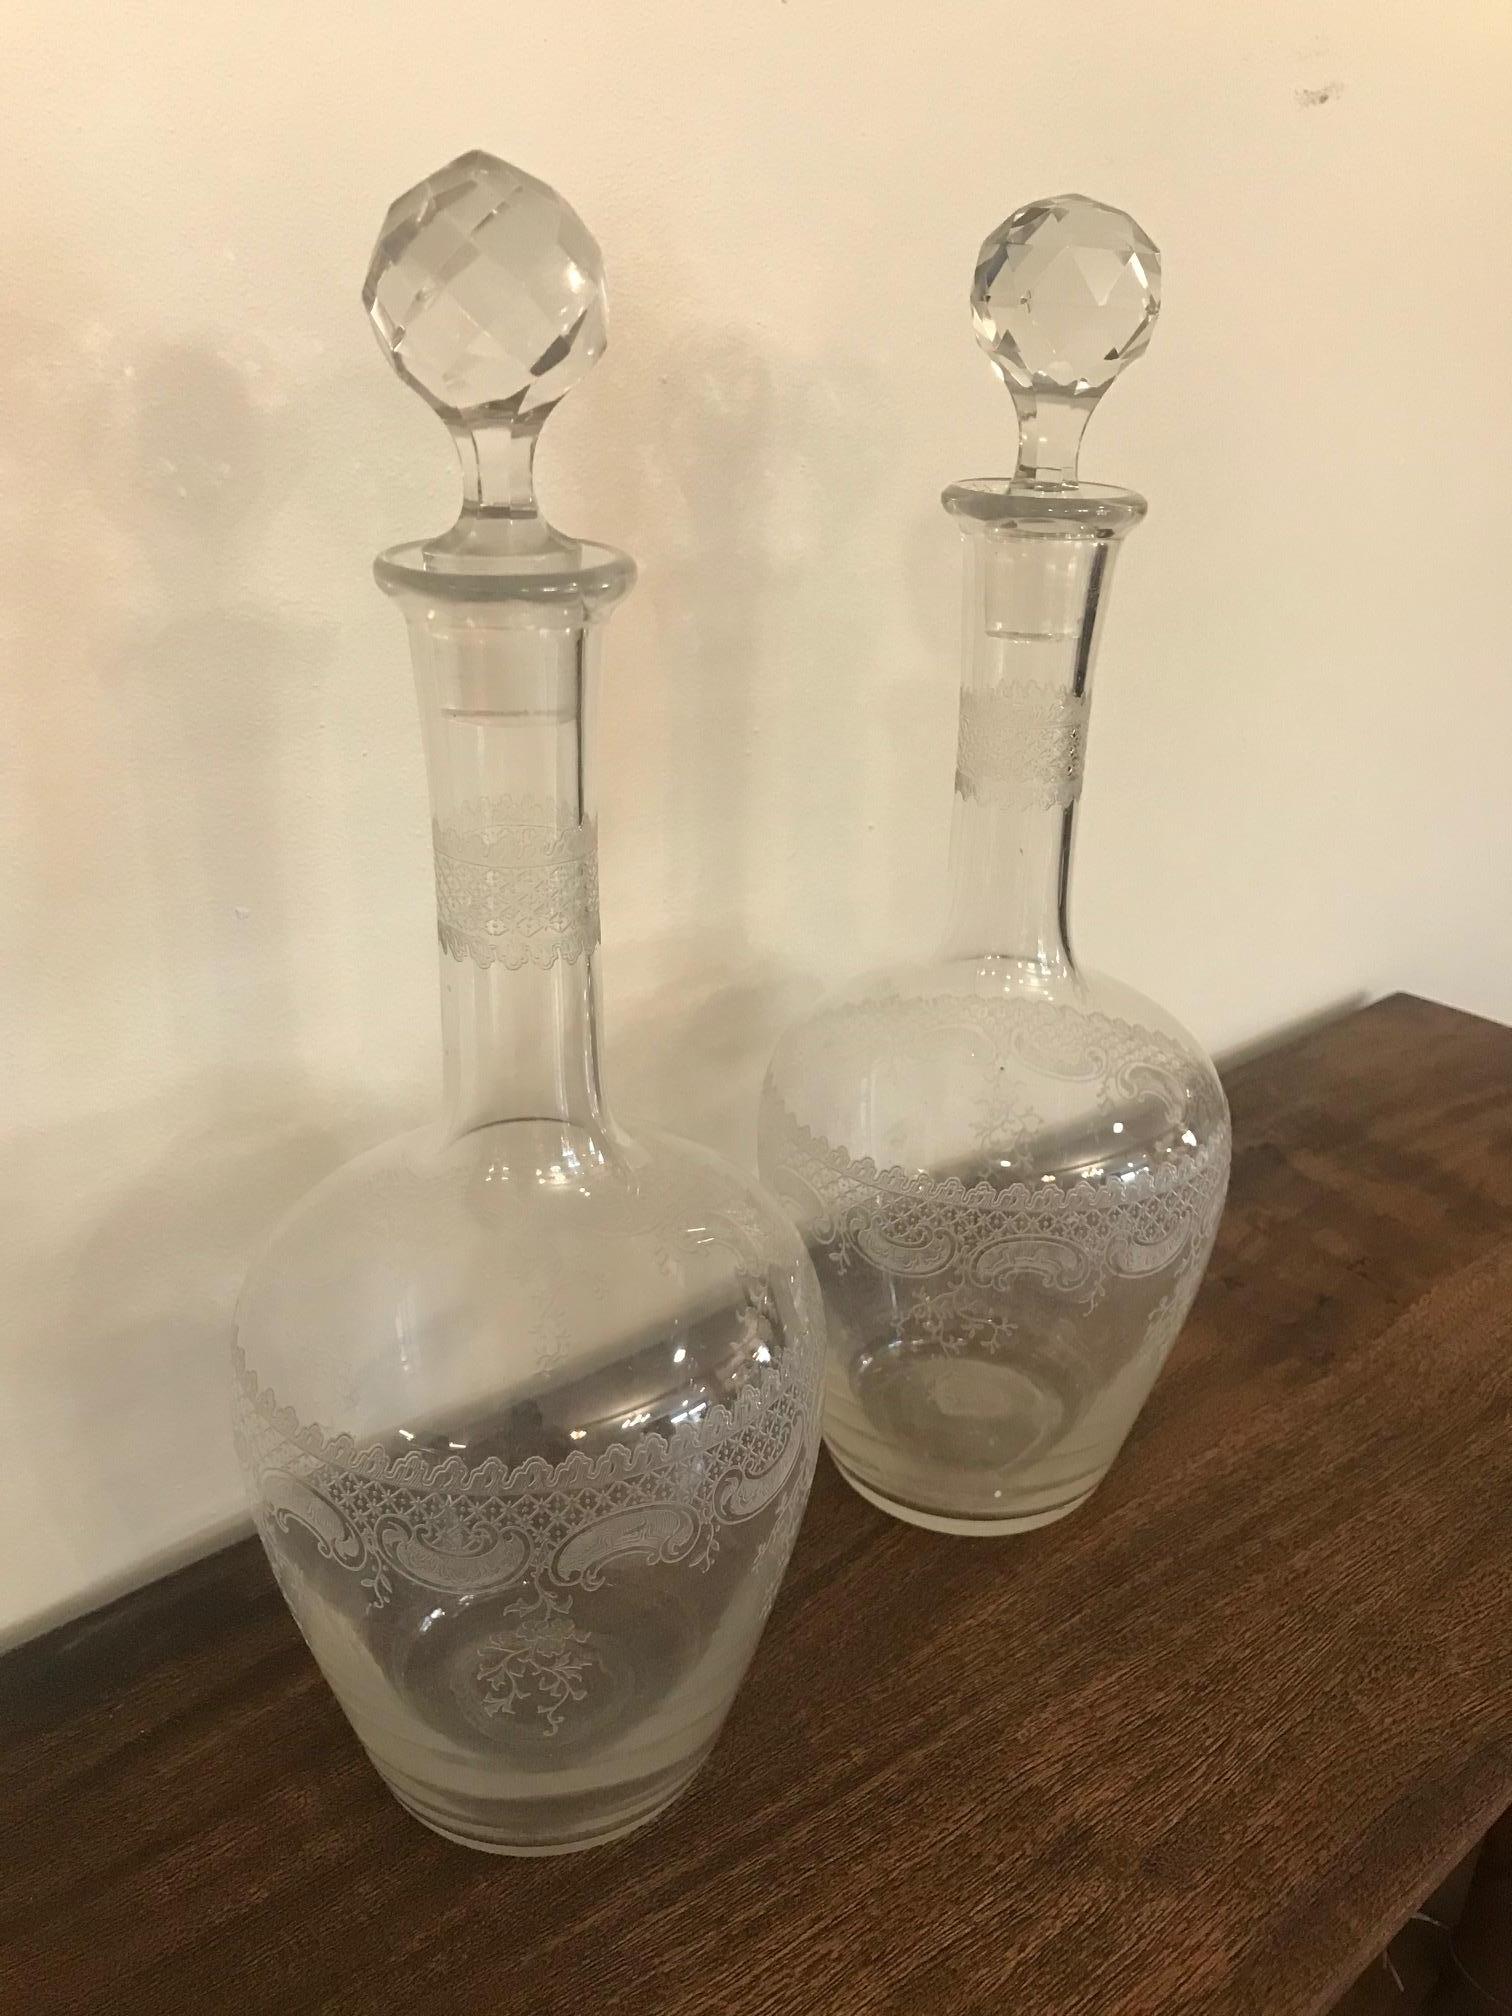 Beautiful pair of 20th century French engraved crystal carafes from the 1900s. 
Very nice engraved details. 
Removable plugs also cut in crystal. 
Exceptional quality and good condition. Has numbers engraved at the top and also on the plug.